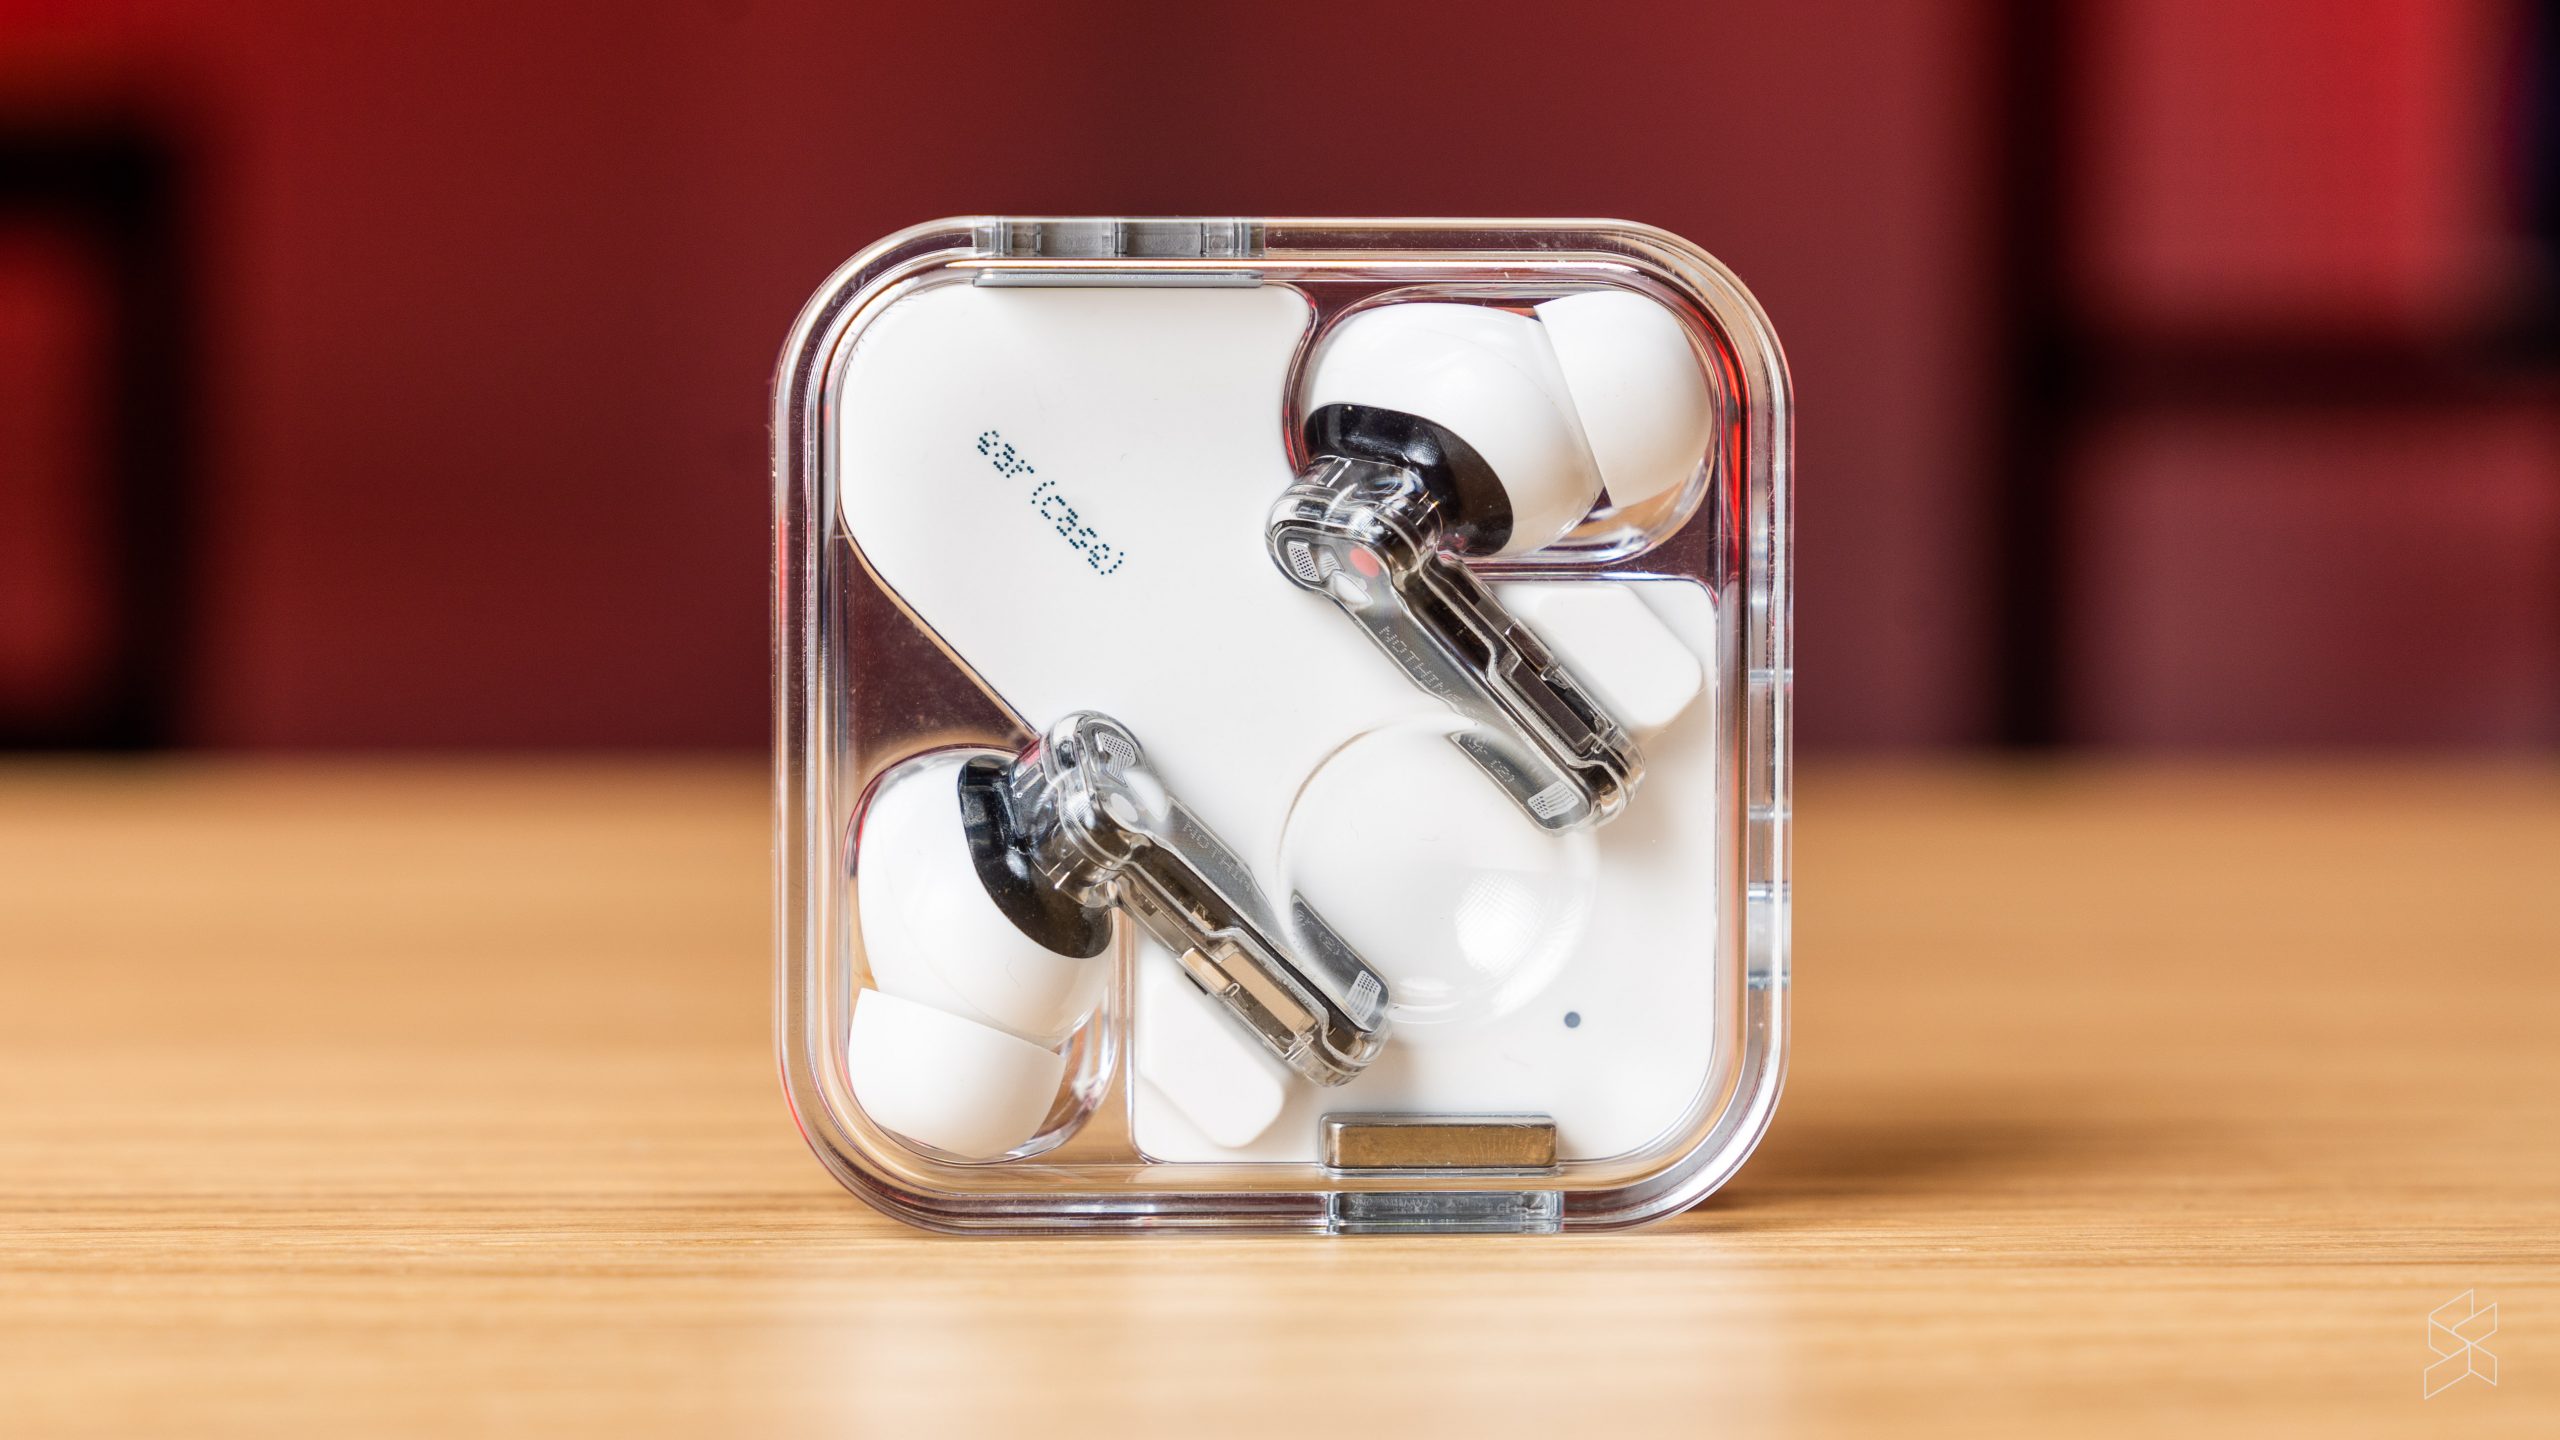 Nothing ear (stick) TWS earbuds launch with a new design, improved